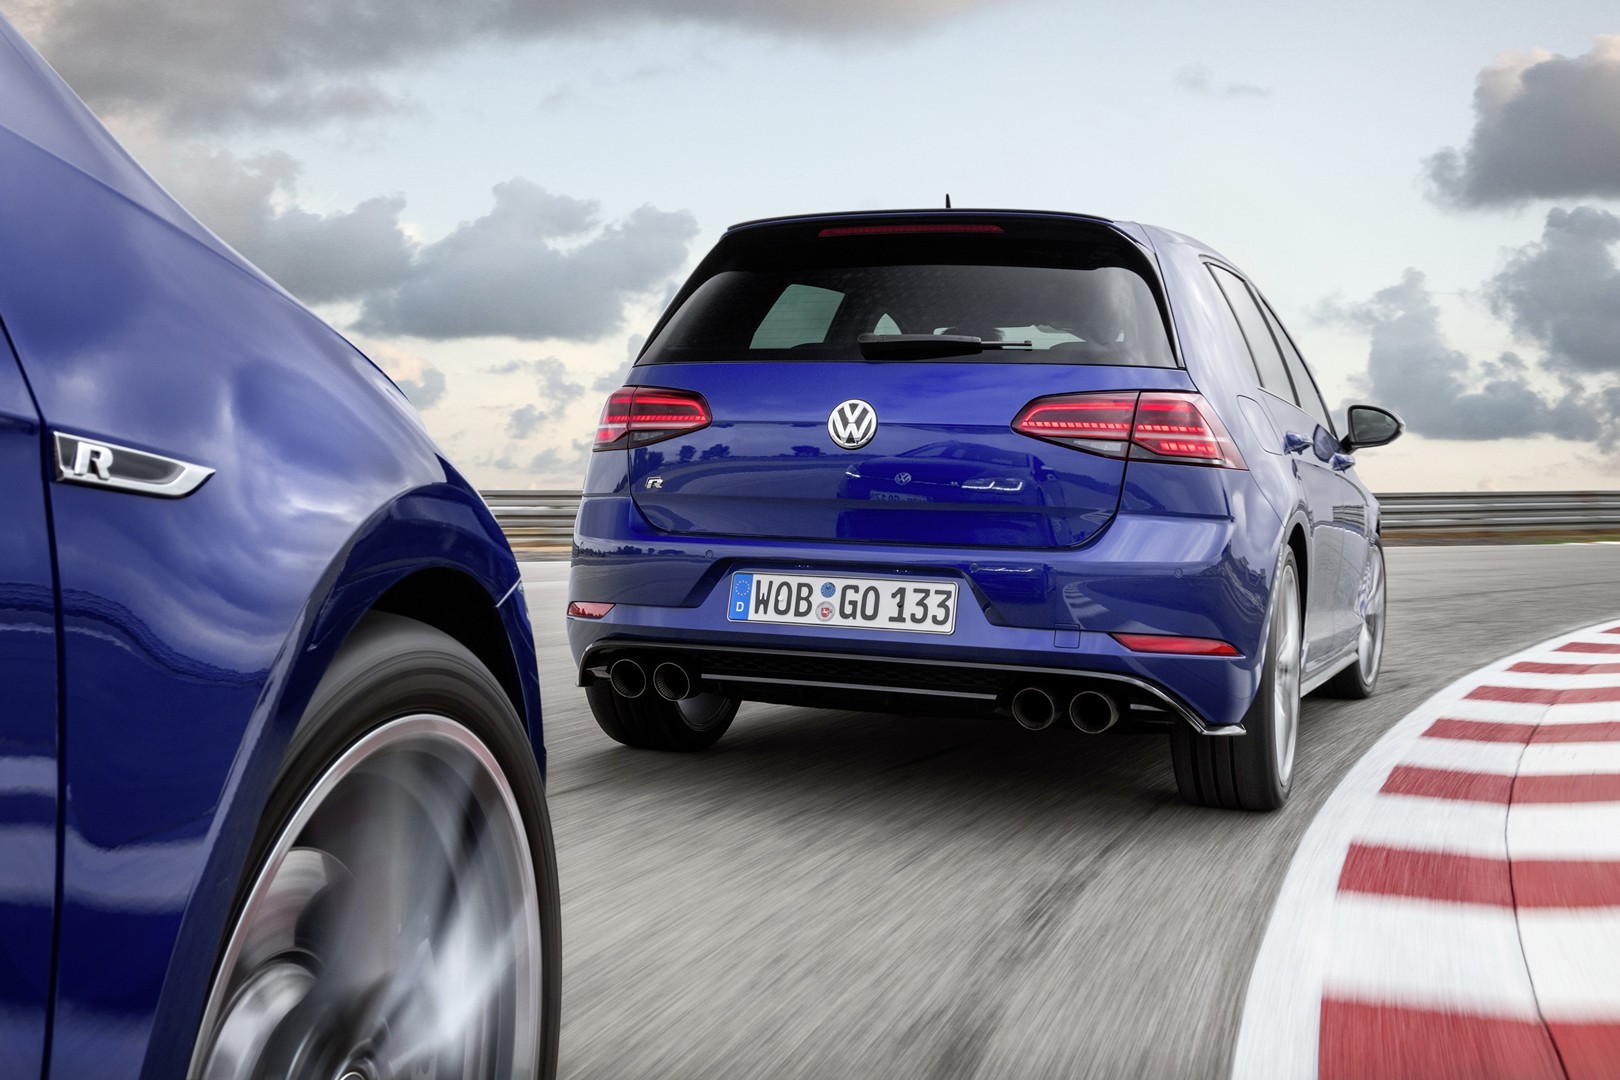 2017 Golf R With Akrapovic Exhaust Sounds Like Popcorn, Makes People Go